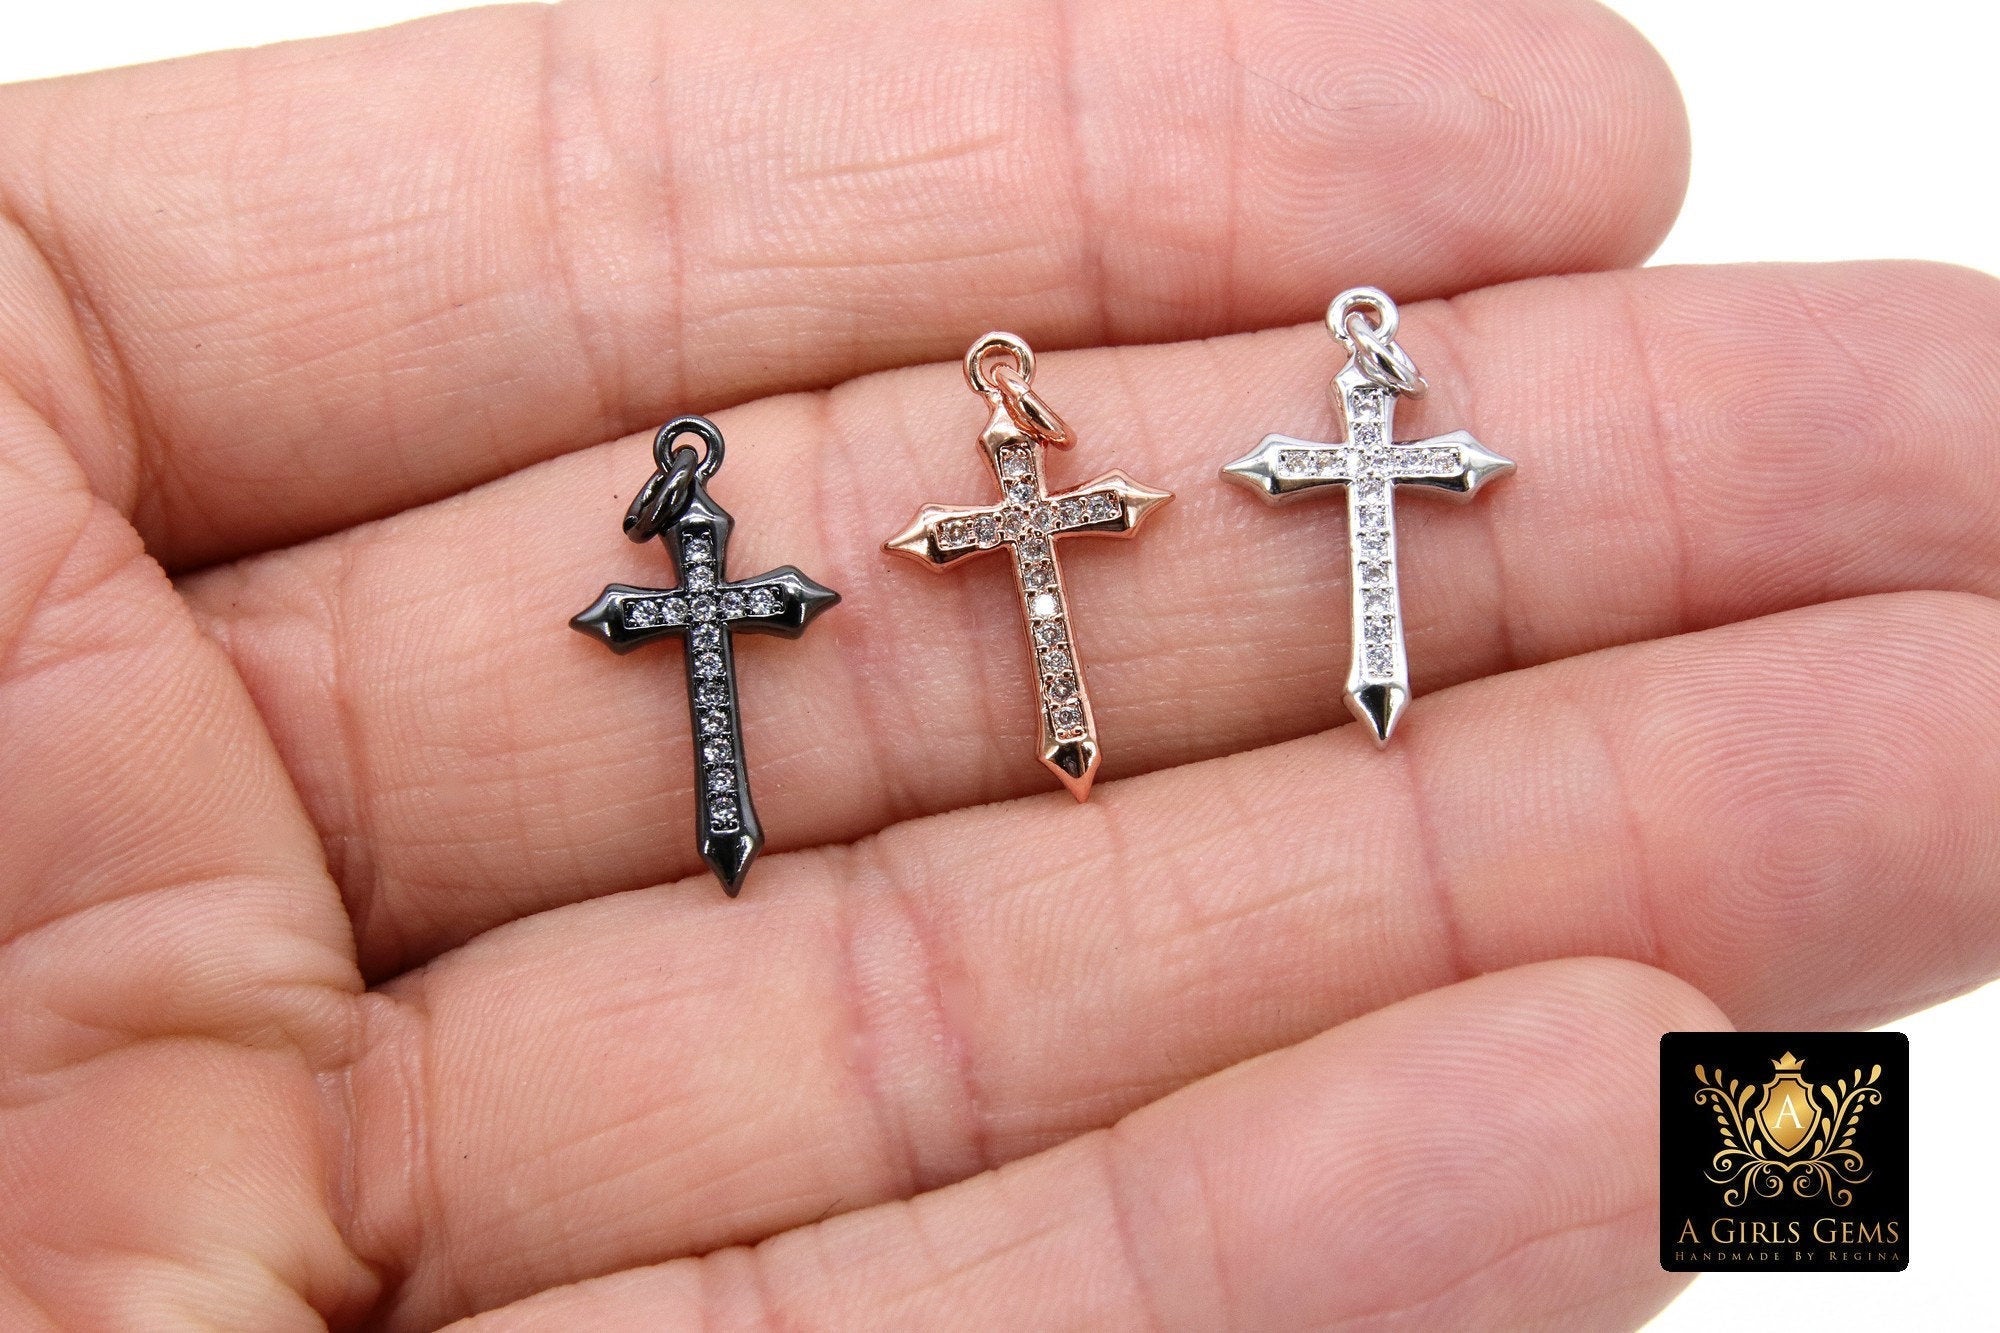 Rose Gold Cross Charms, CZ Micro Pave Dainty Religious Cross Pendants, 12 x 21 mm Small Cross for Rosary Chains, Beaded Bracelets - A Girls Gems